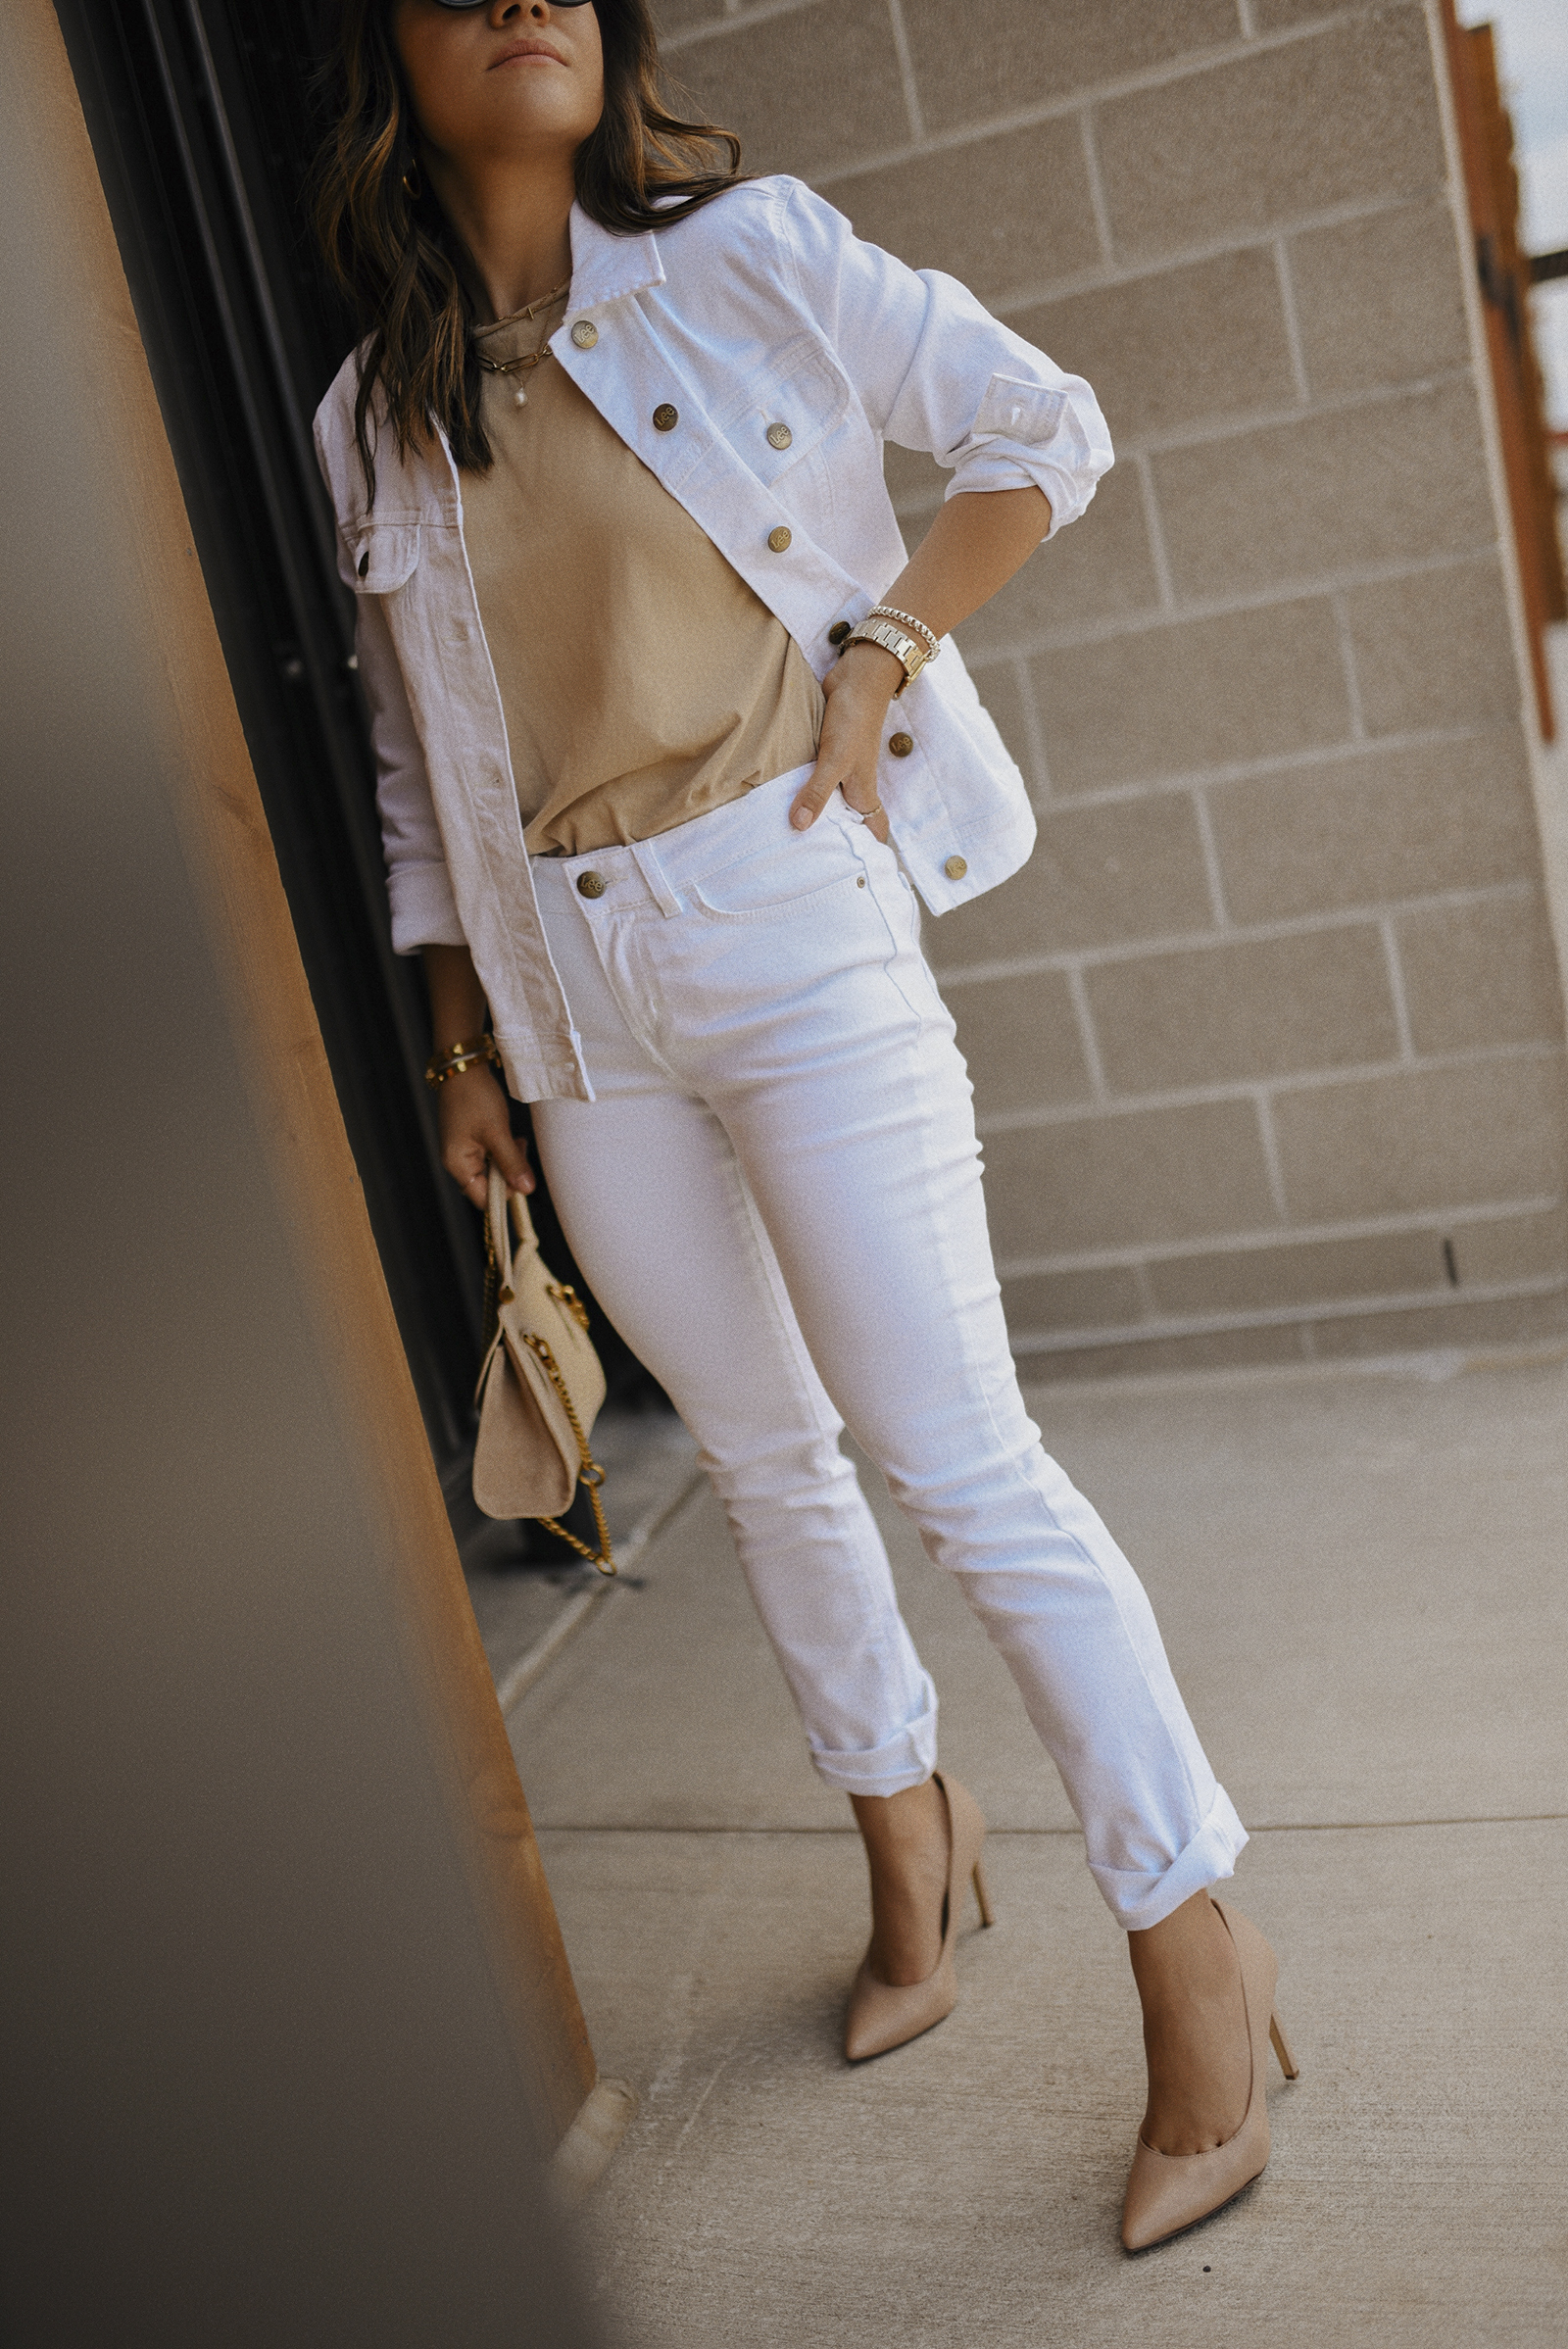 Justine Lee wearing a white blouse, denim jeans outside Chanel during...  News Photo - Getty Images